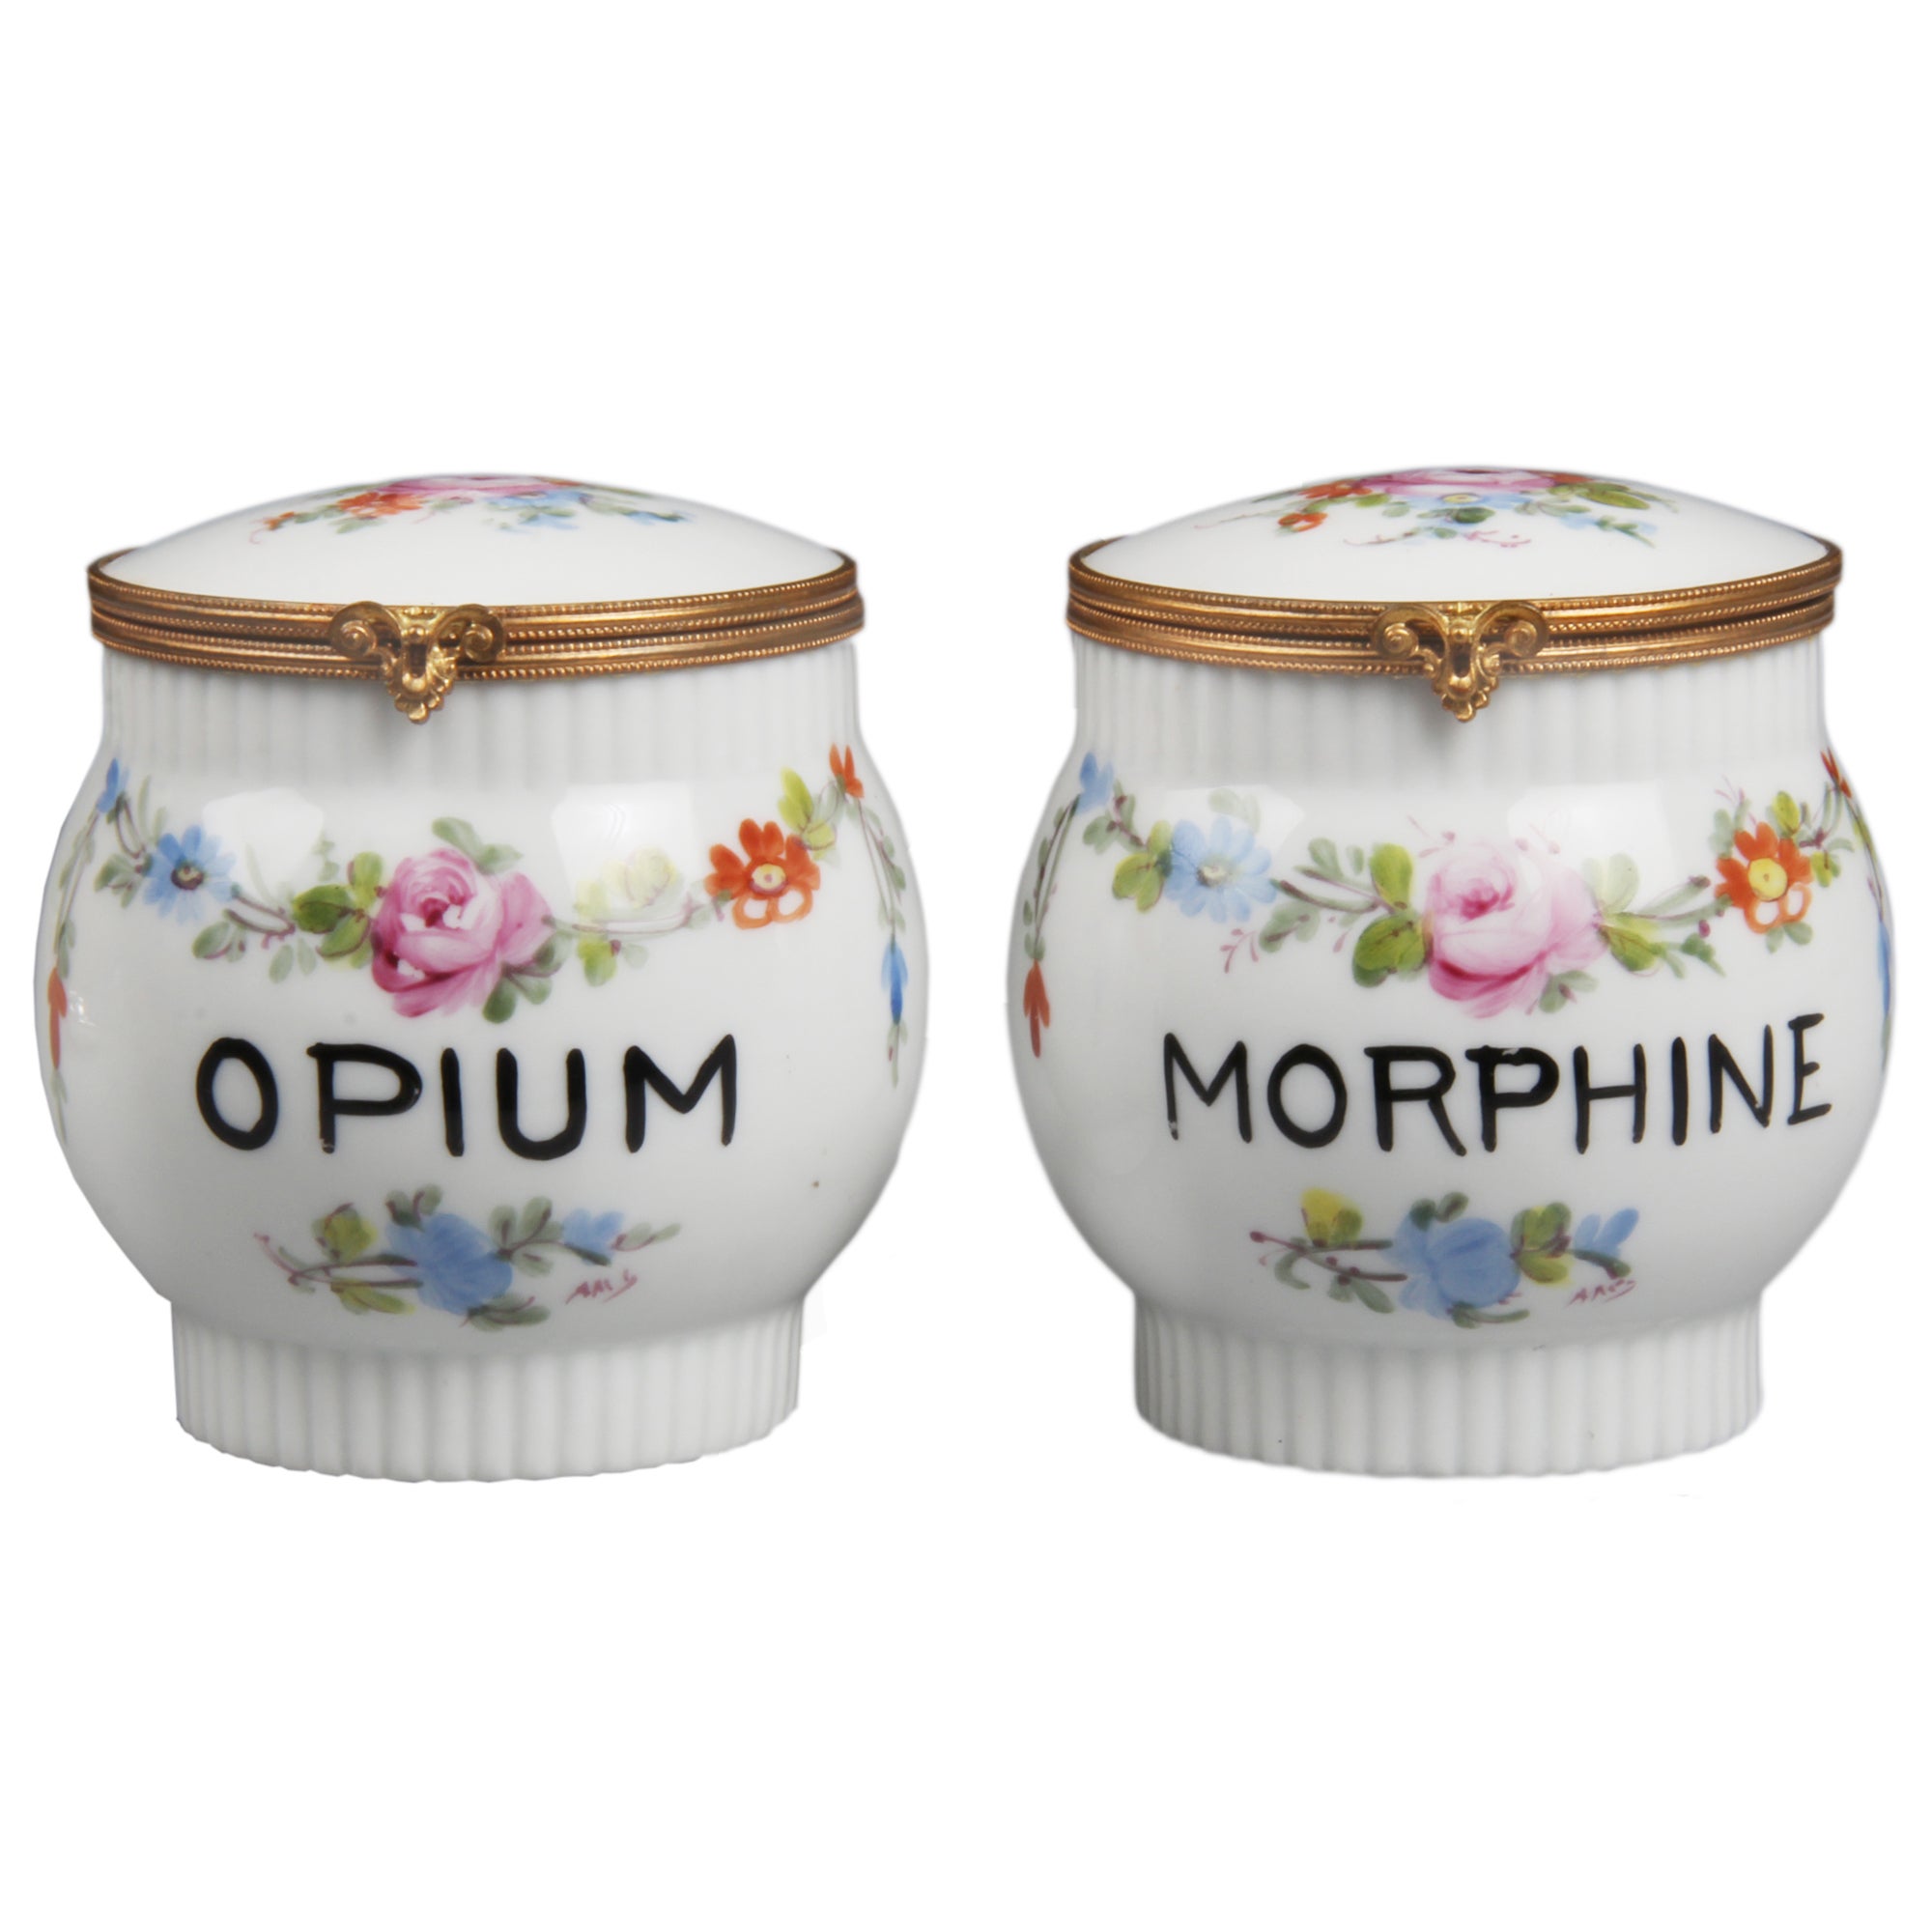 Limoge Opium And Morphine Porcelain Jars with a Floral Motif